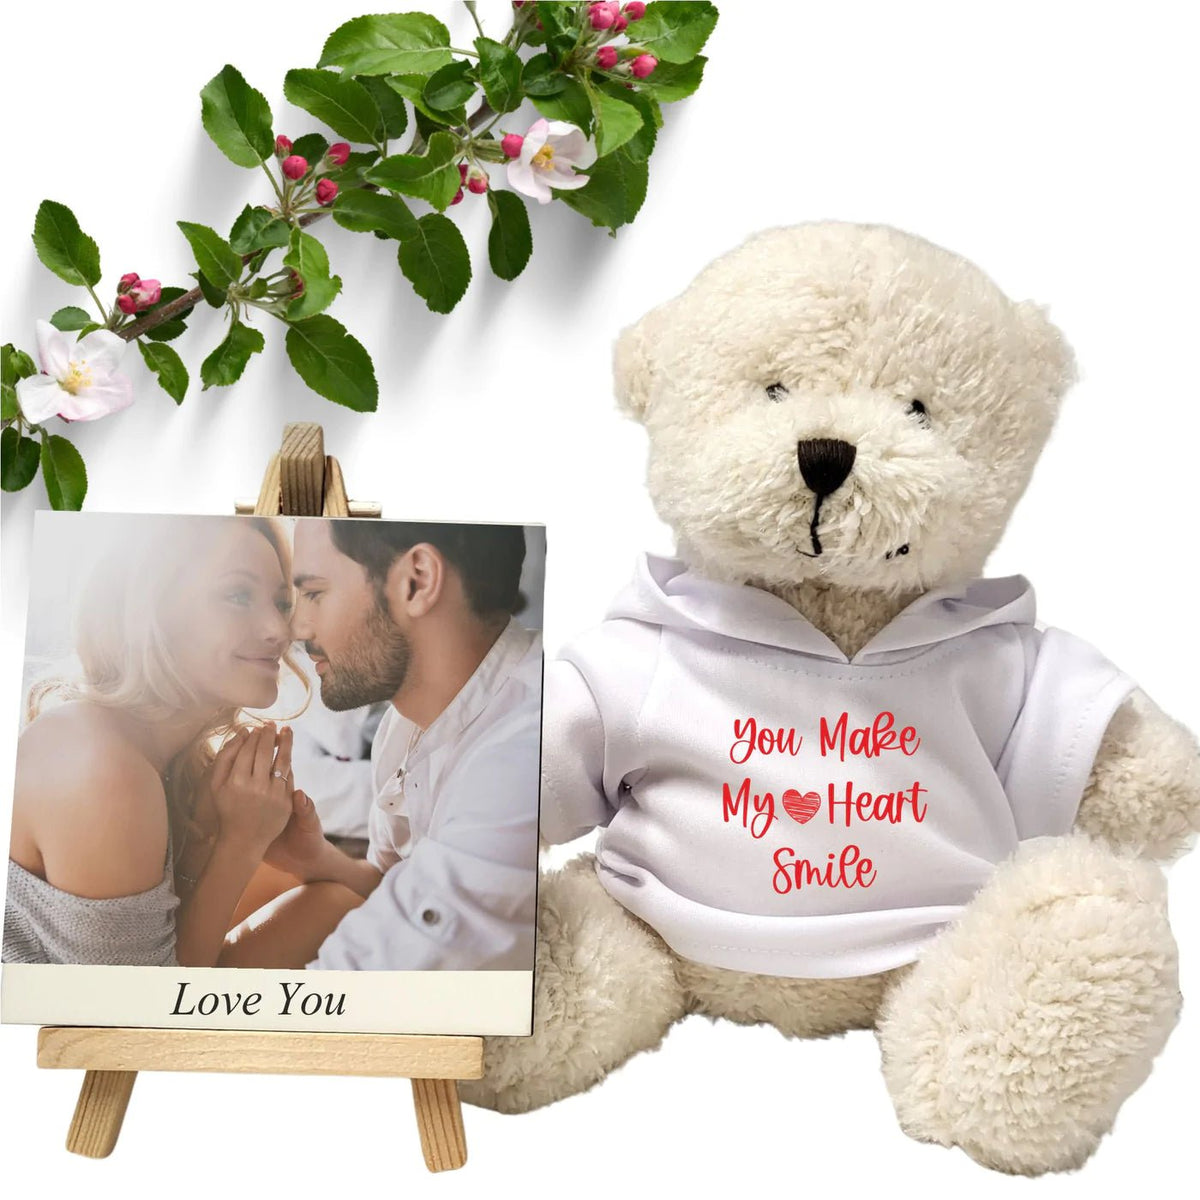 Pure Essence Greetings Your Make My Heart Smile Teddy & Photo Plaque Gift Set - Stuffed & Plush Animals - British D'sire